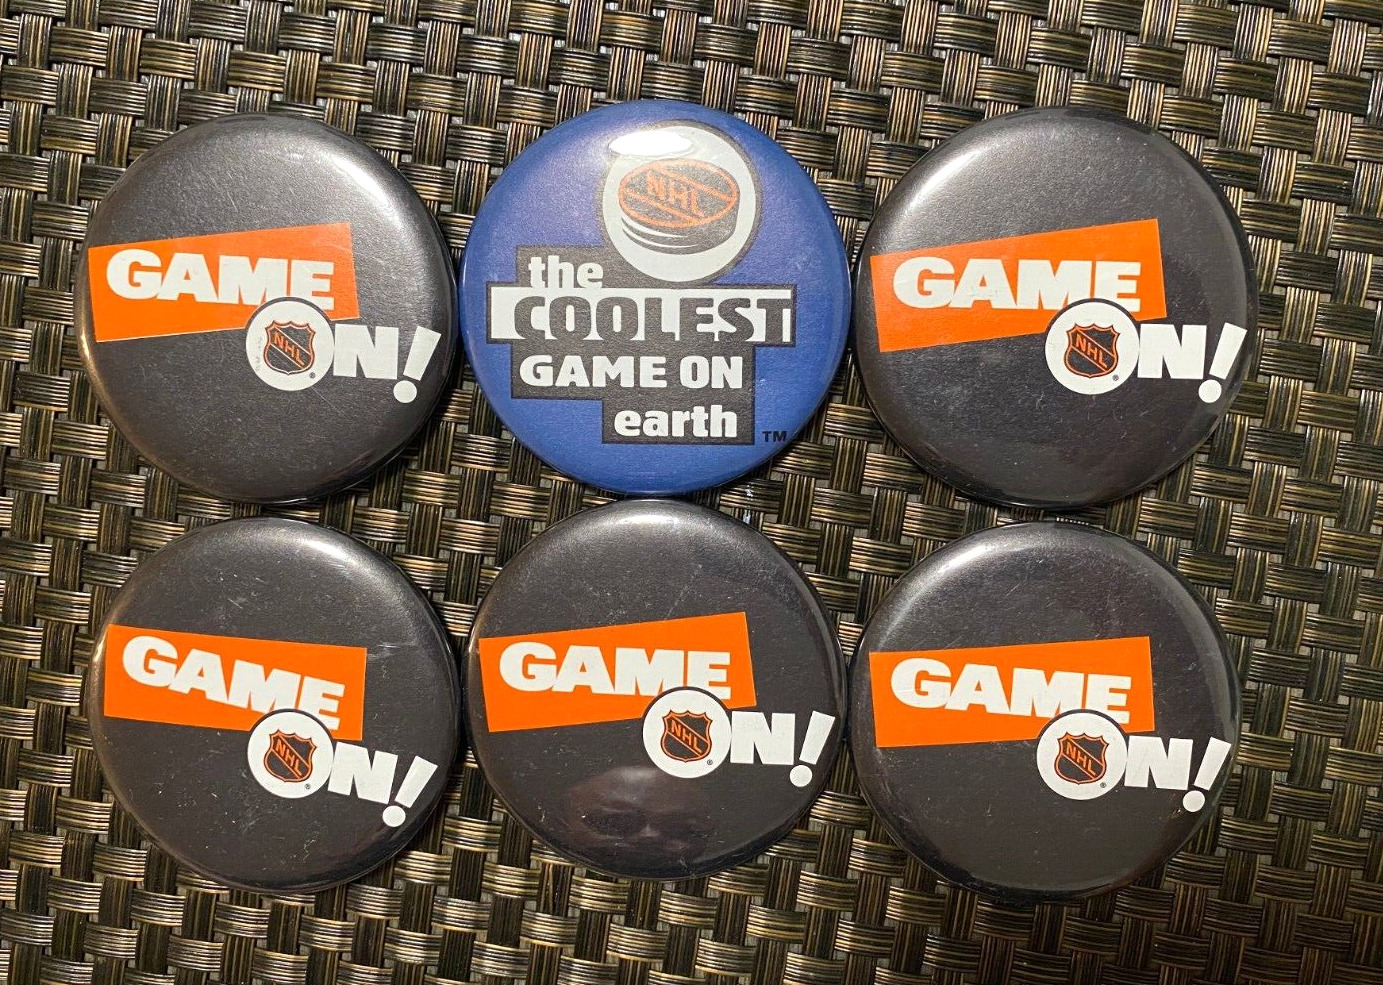 6PC LOT VINTAGE NHL HOCKEY GAME ON THE COOLEST GAME ON EARTH BUTTON BADGE PINS